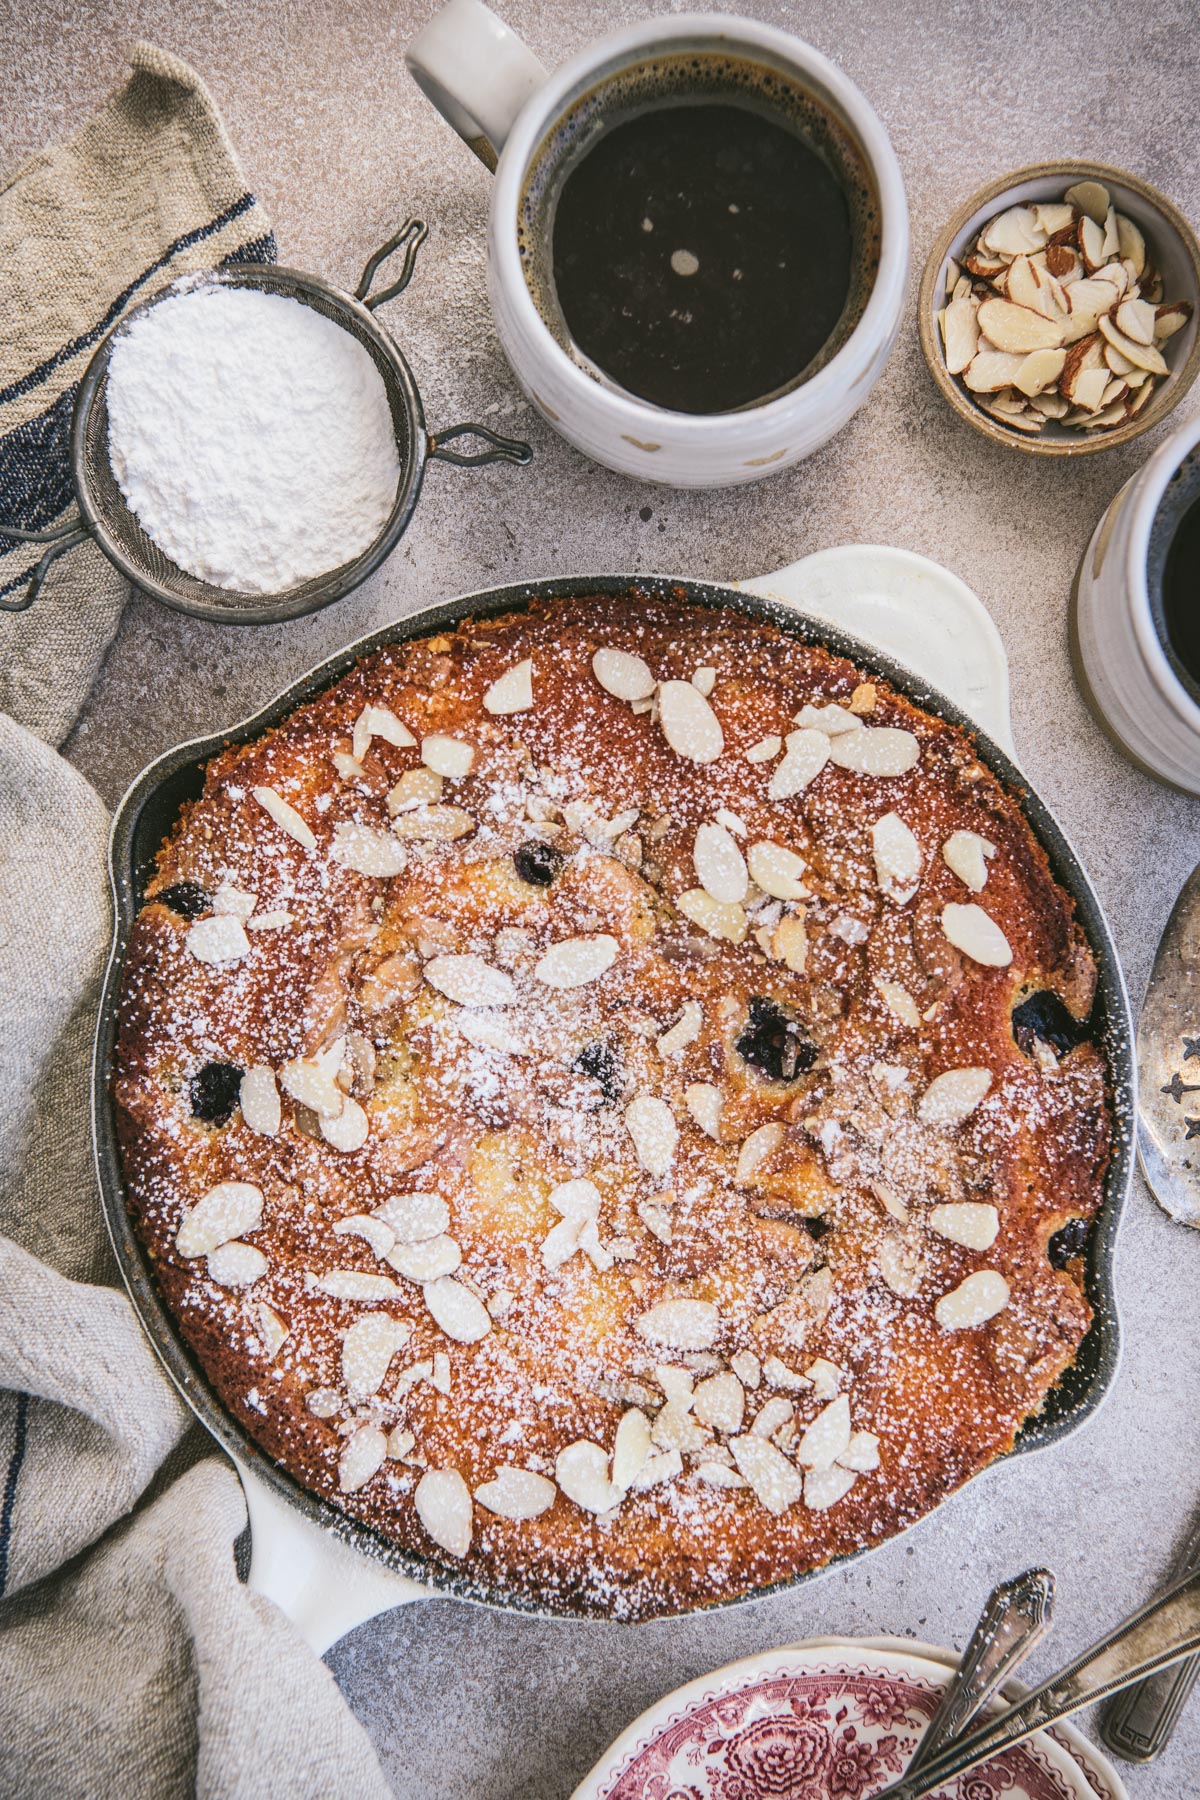 Overhead shot of a cherry skillet cake with almonds on a table.